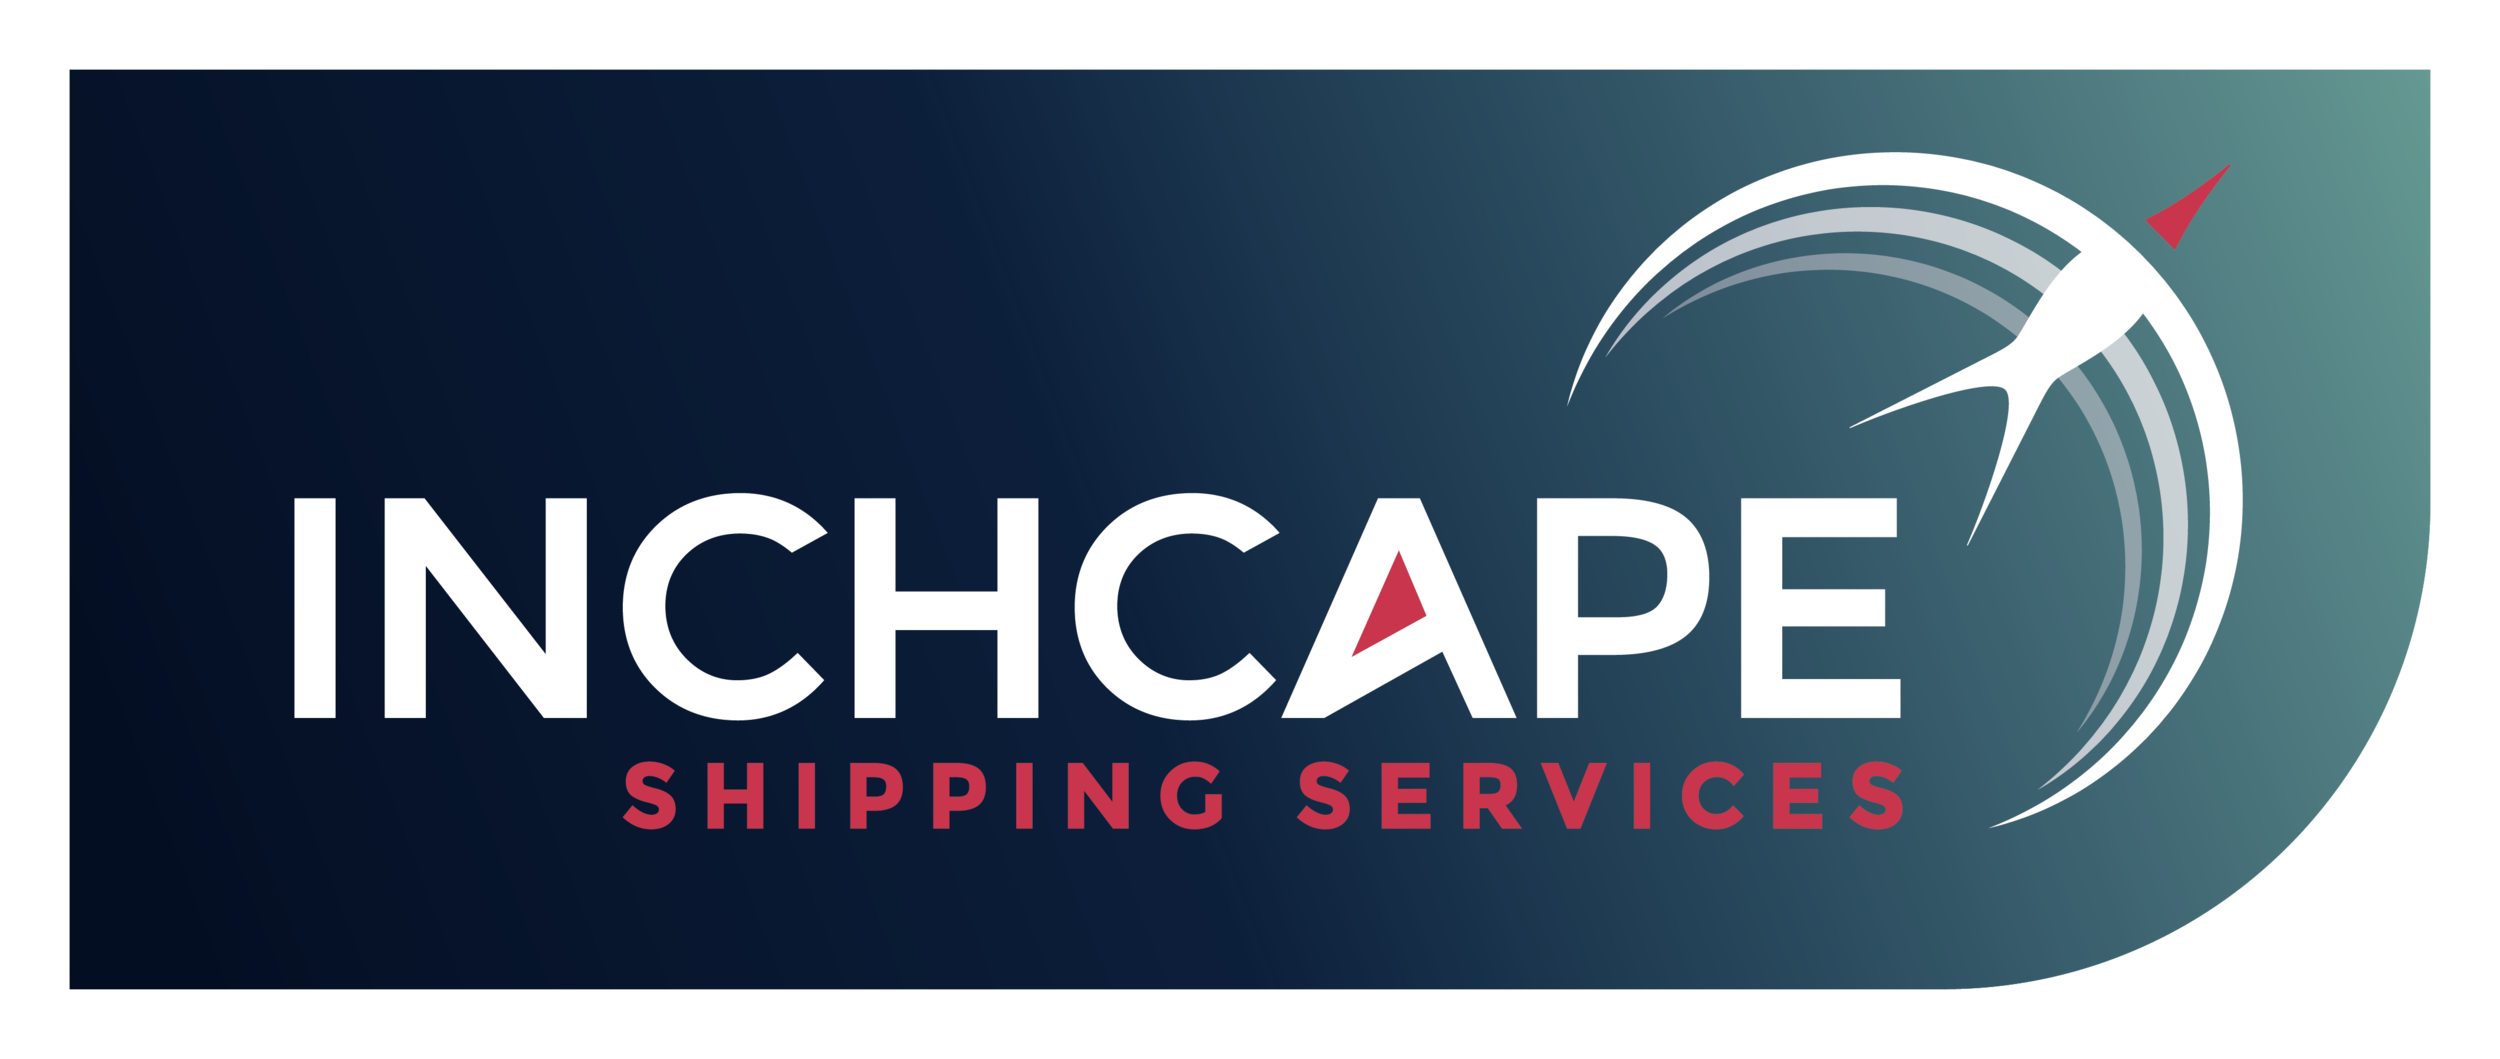 Inchcape Shipping Services UK.png